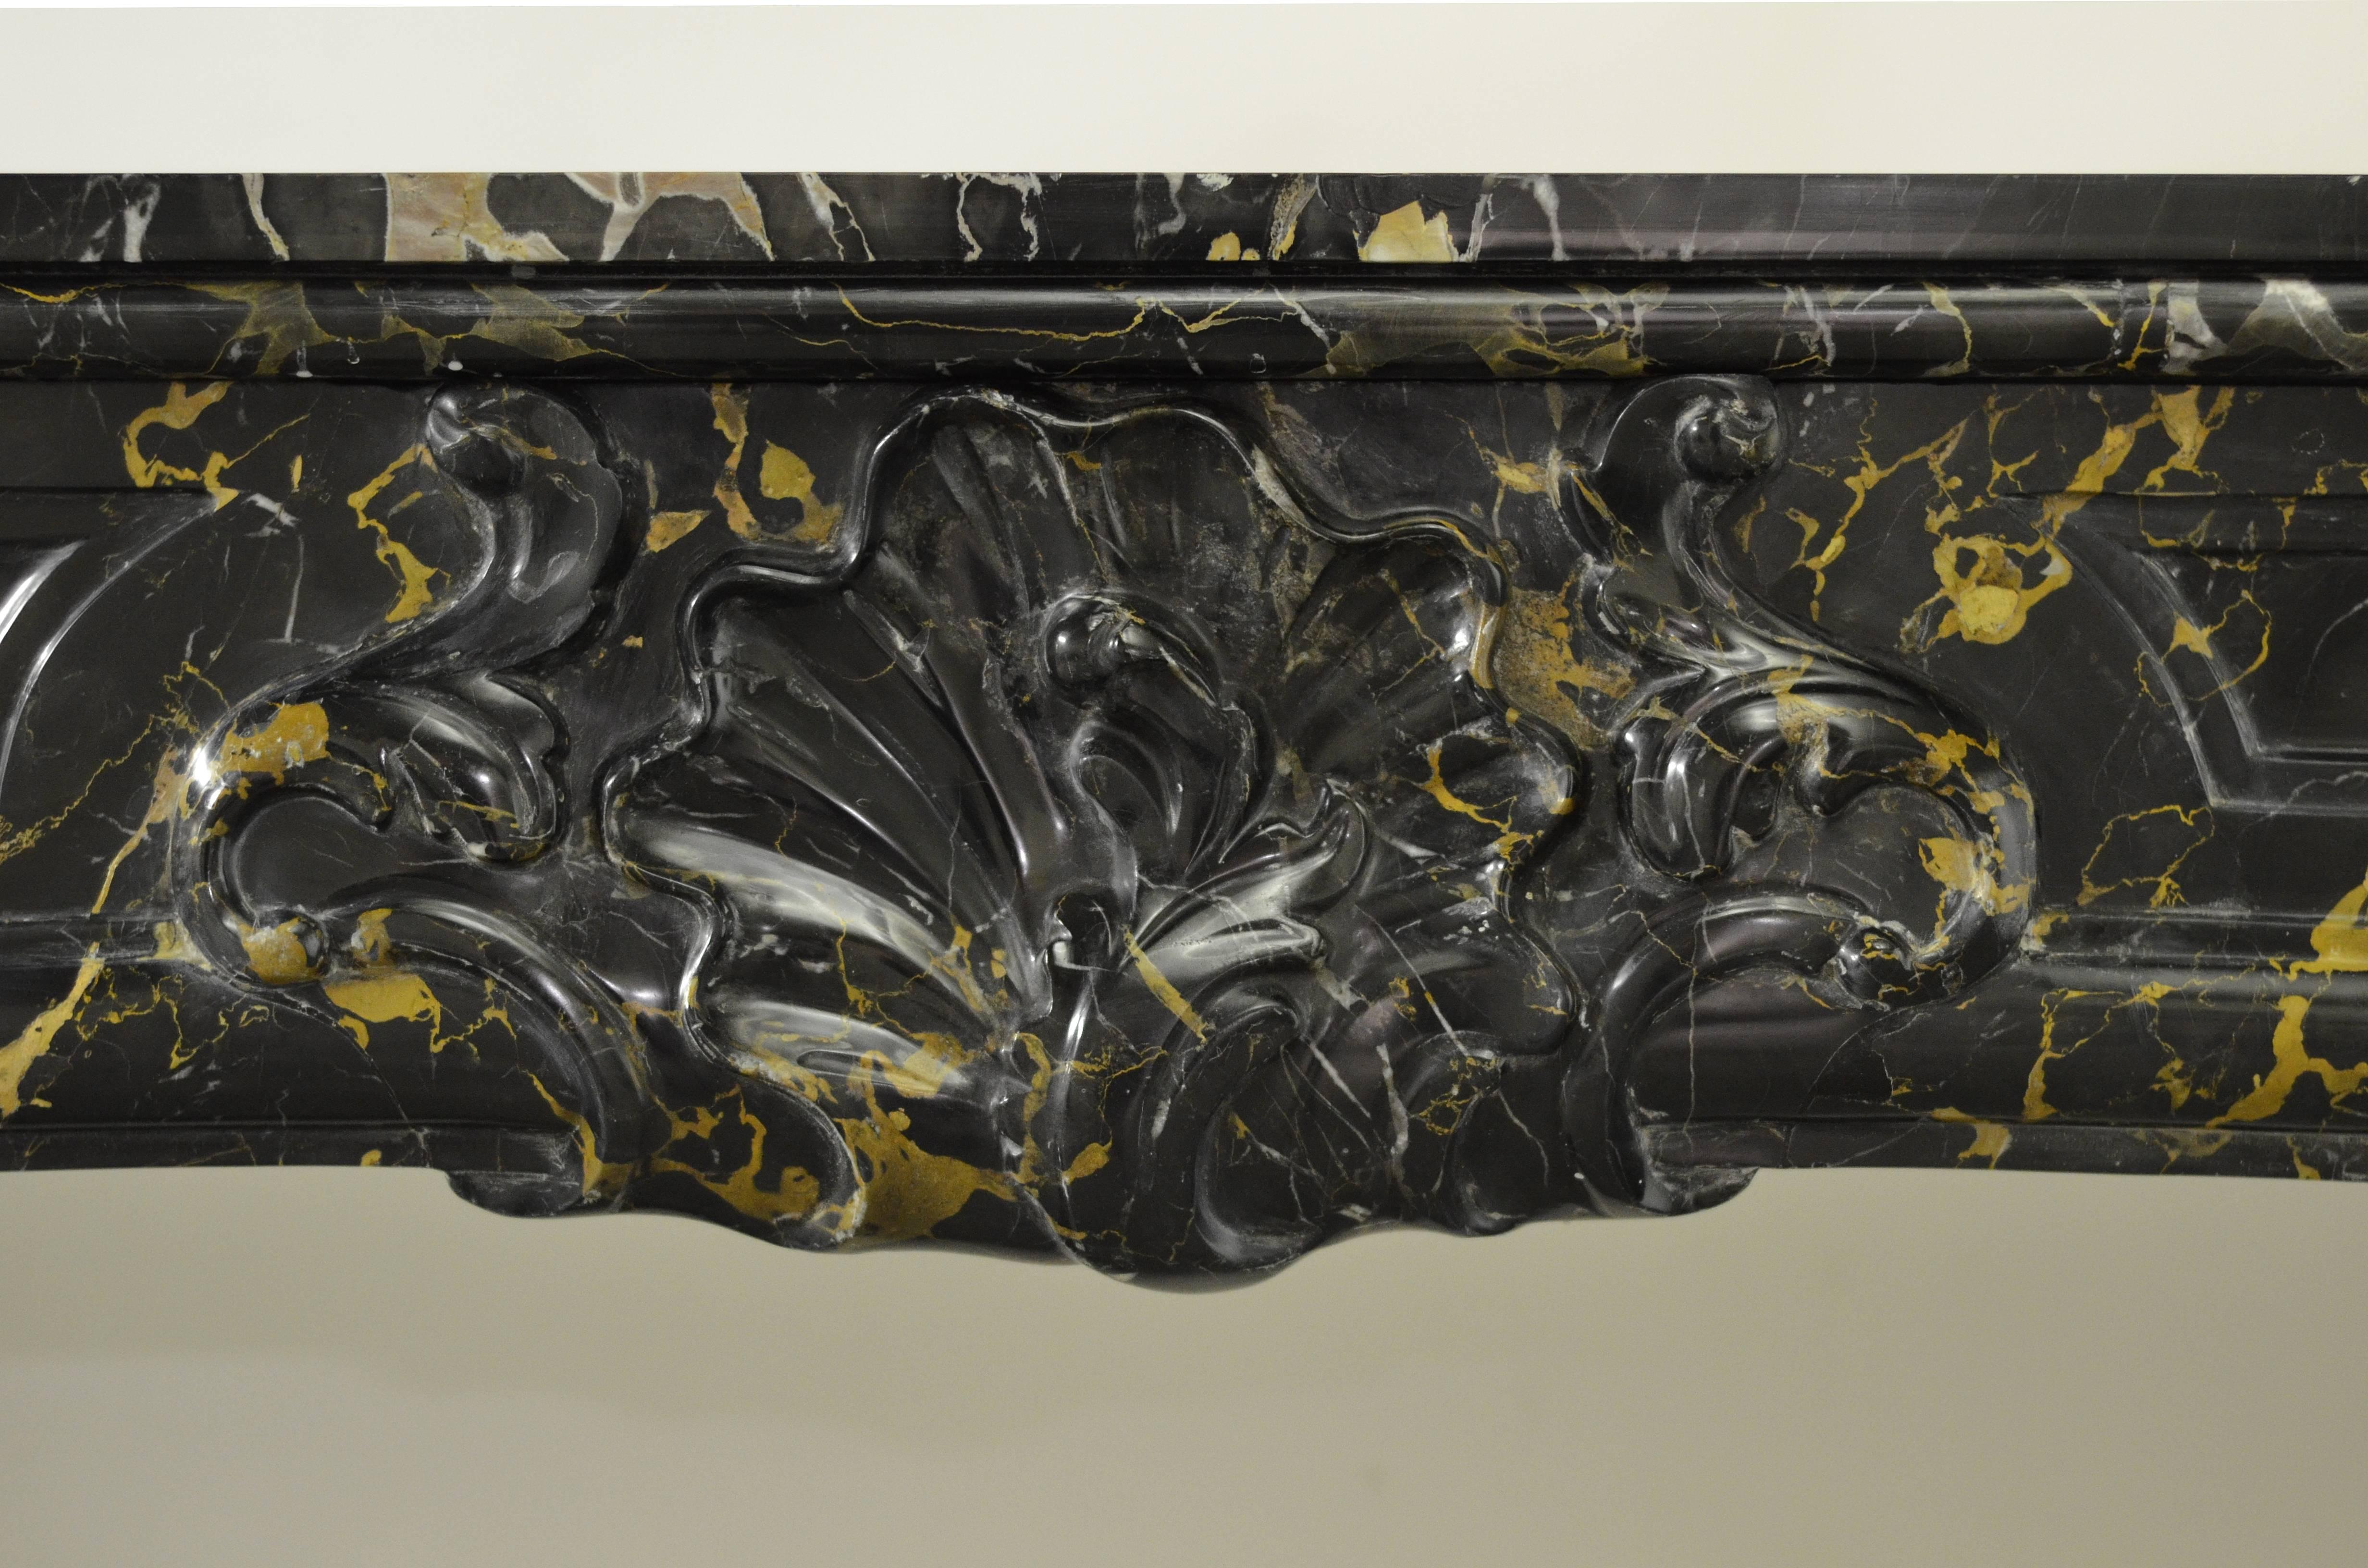 Beautiful 18th Century Dutch Louis XV fireplace. This mantel is executed in Italian Black and gold Portoro (port d'or) Marble.

Known provenance.
Restored, please ask.
Ready to be shipped and installed.